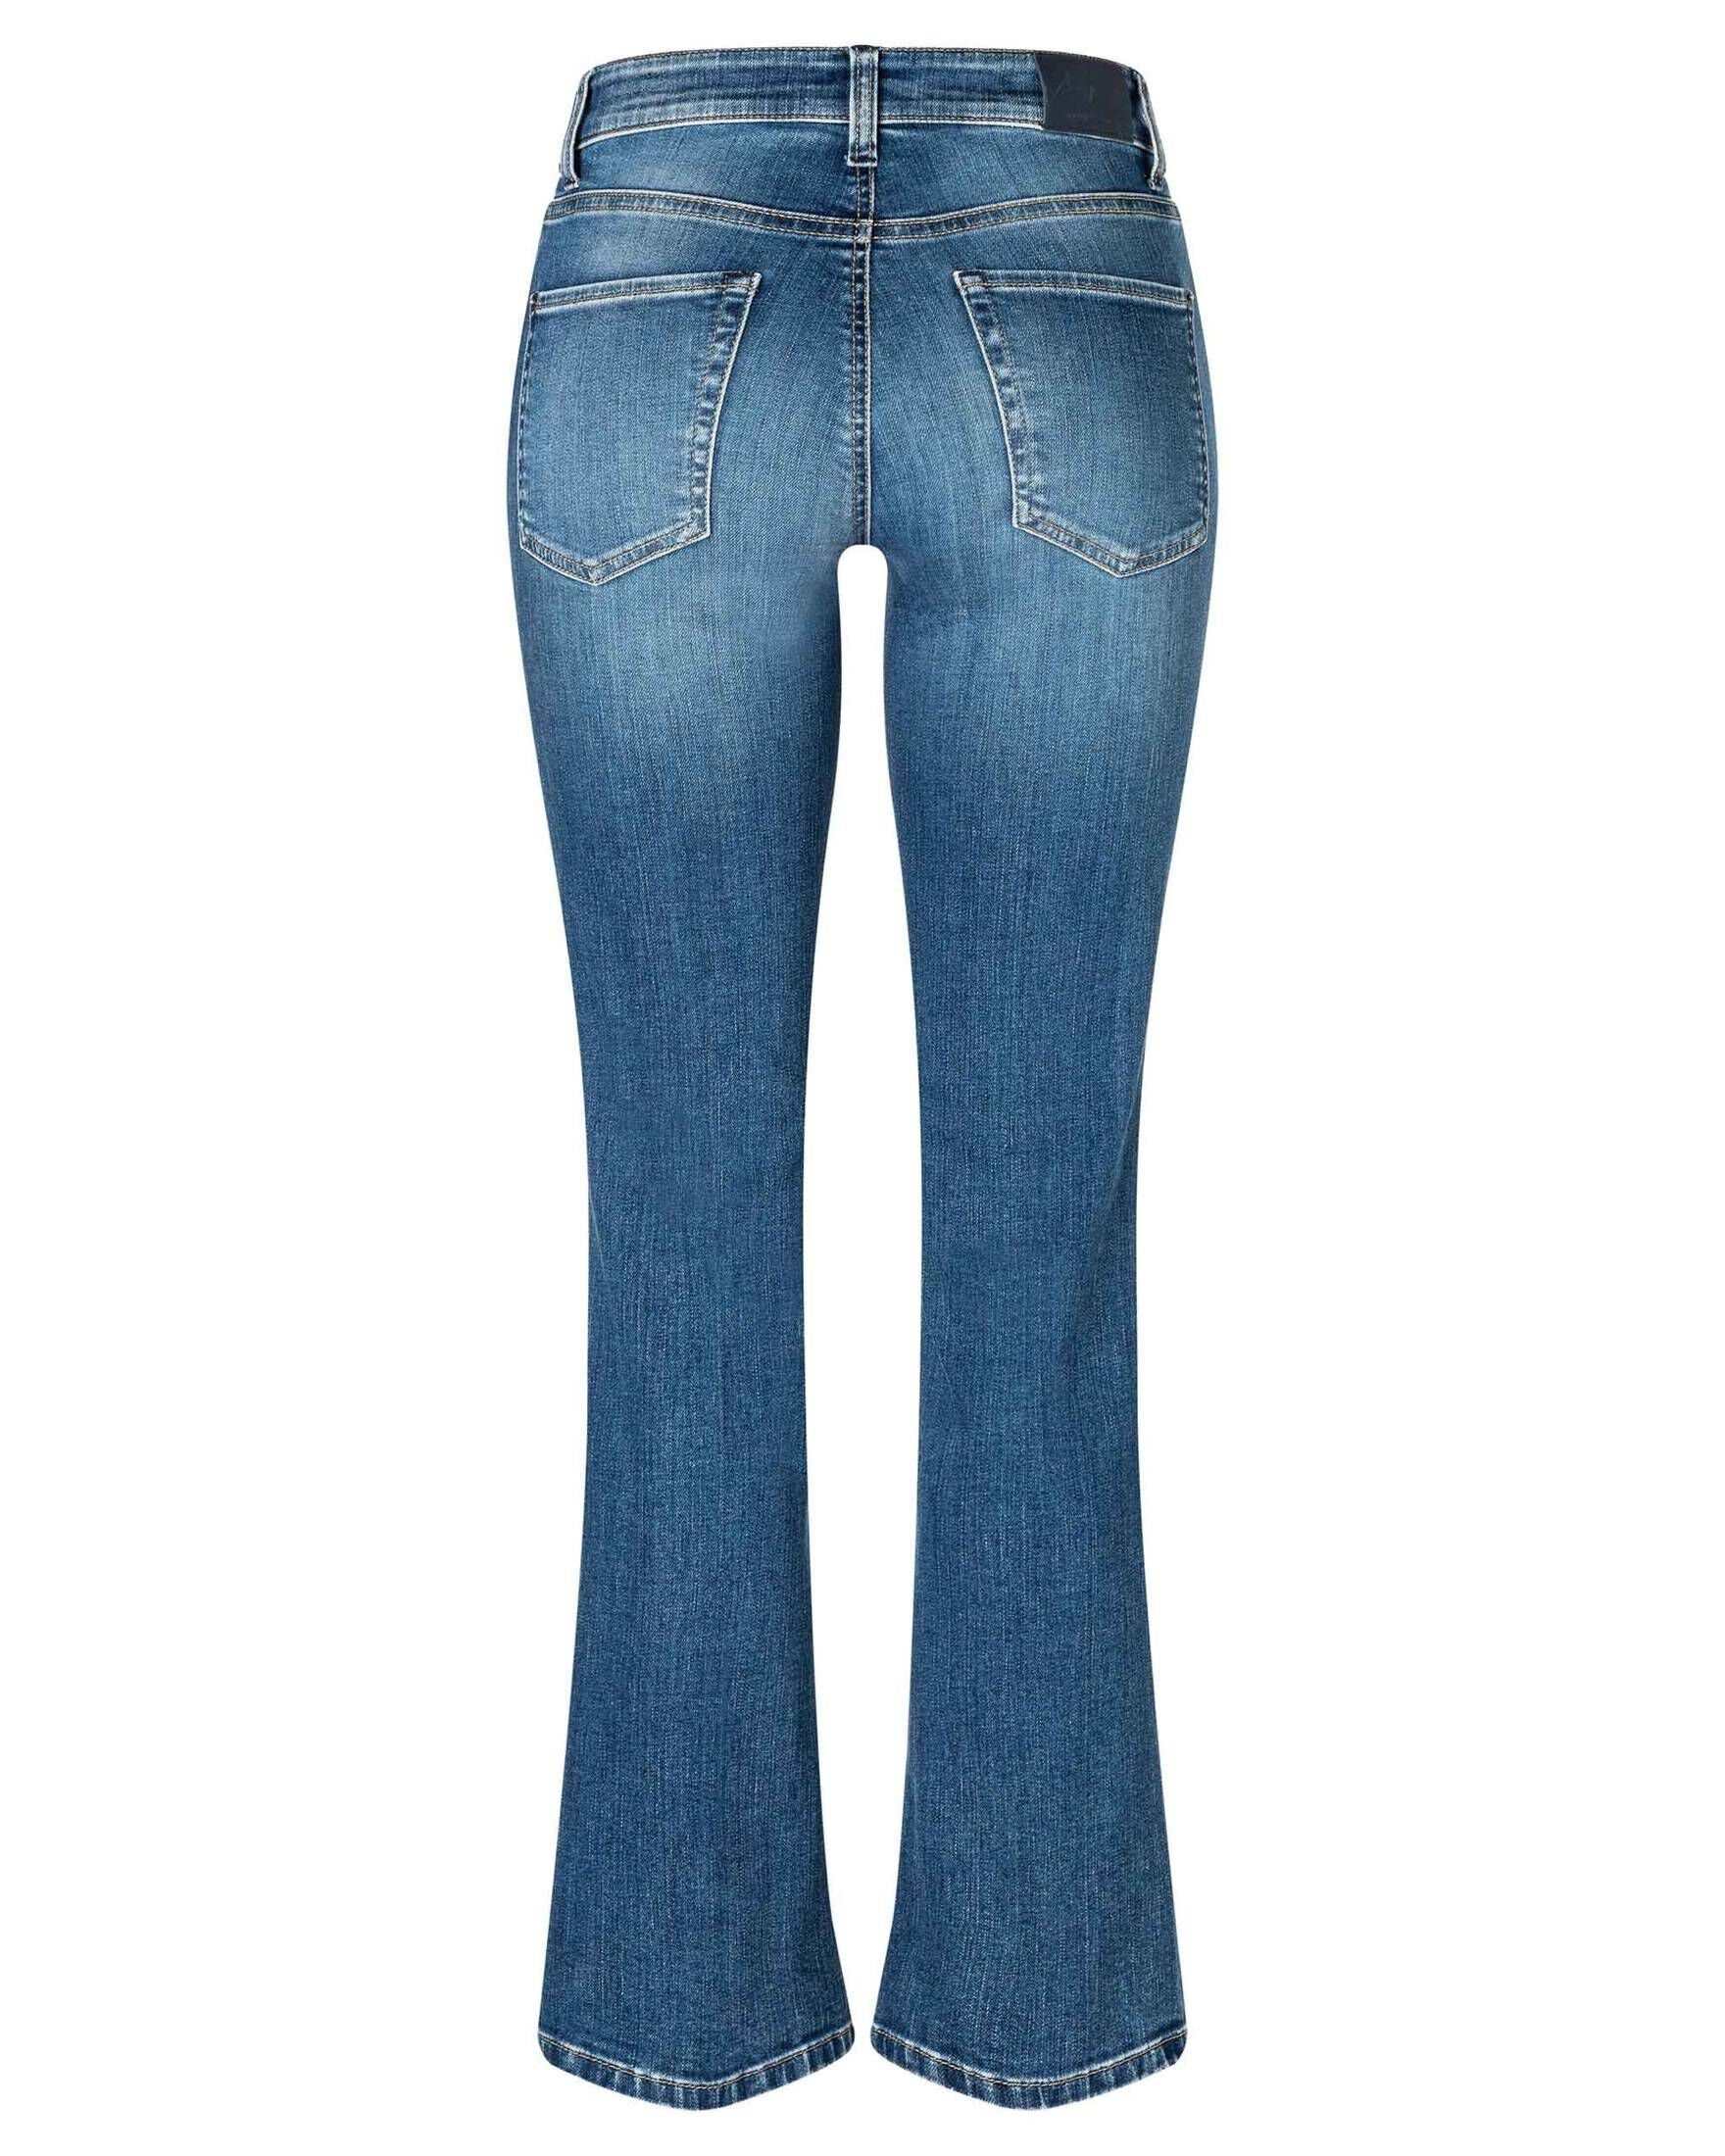 Cambio 5-Pocket-Jeans Damen (1-tlg) Bootcutjeans